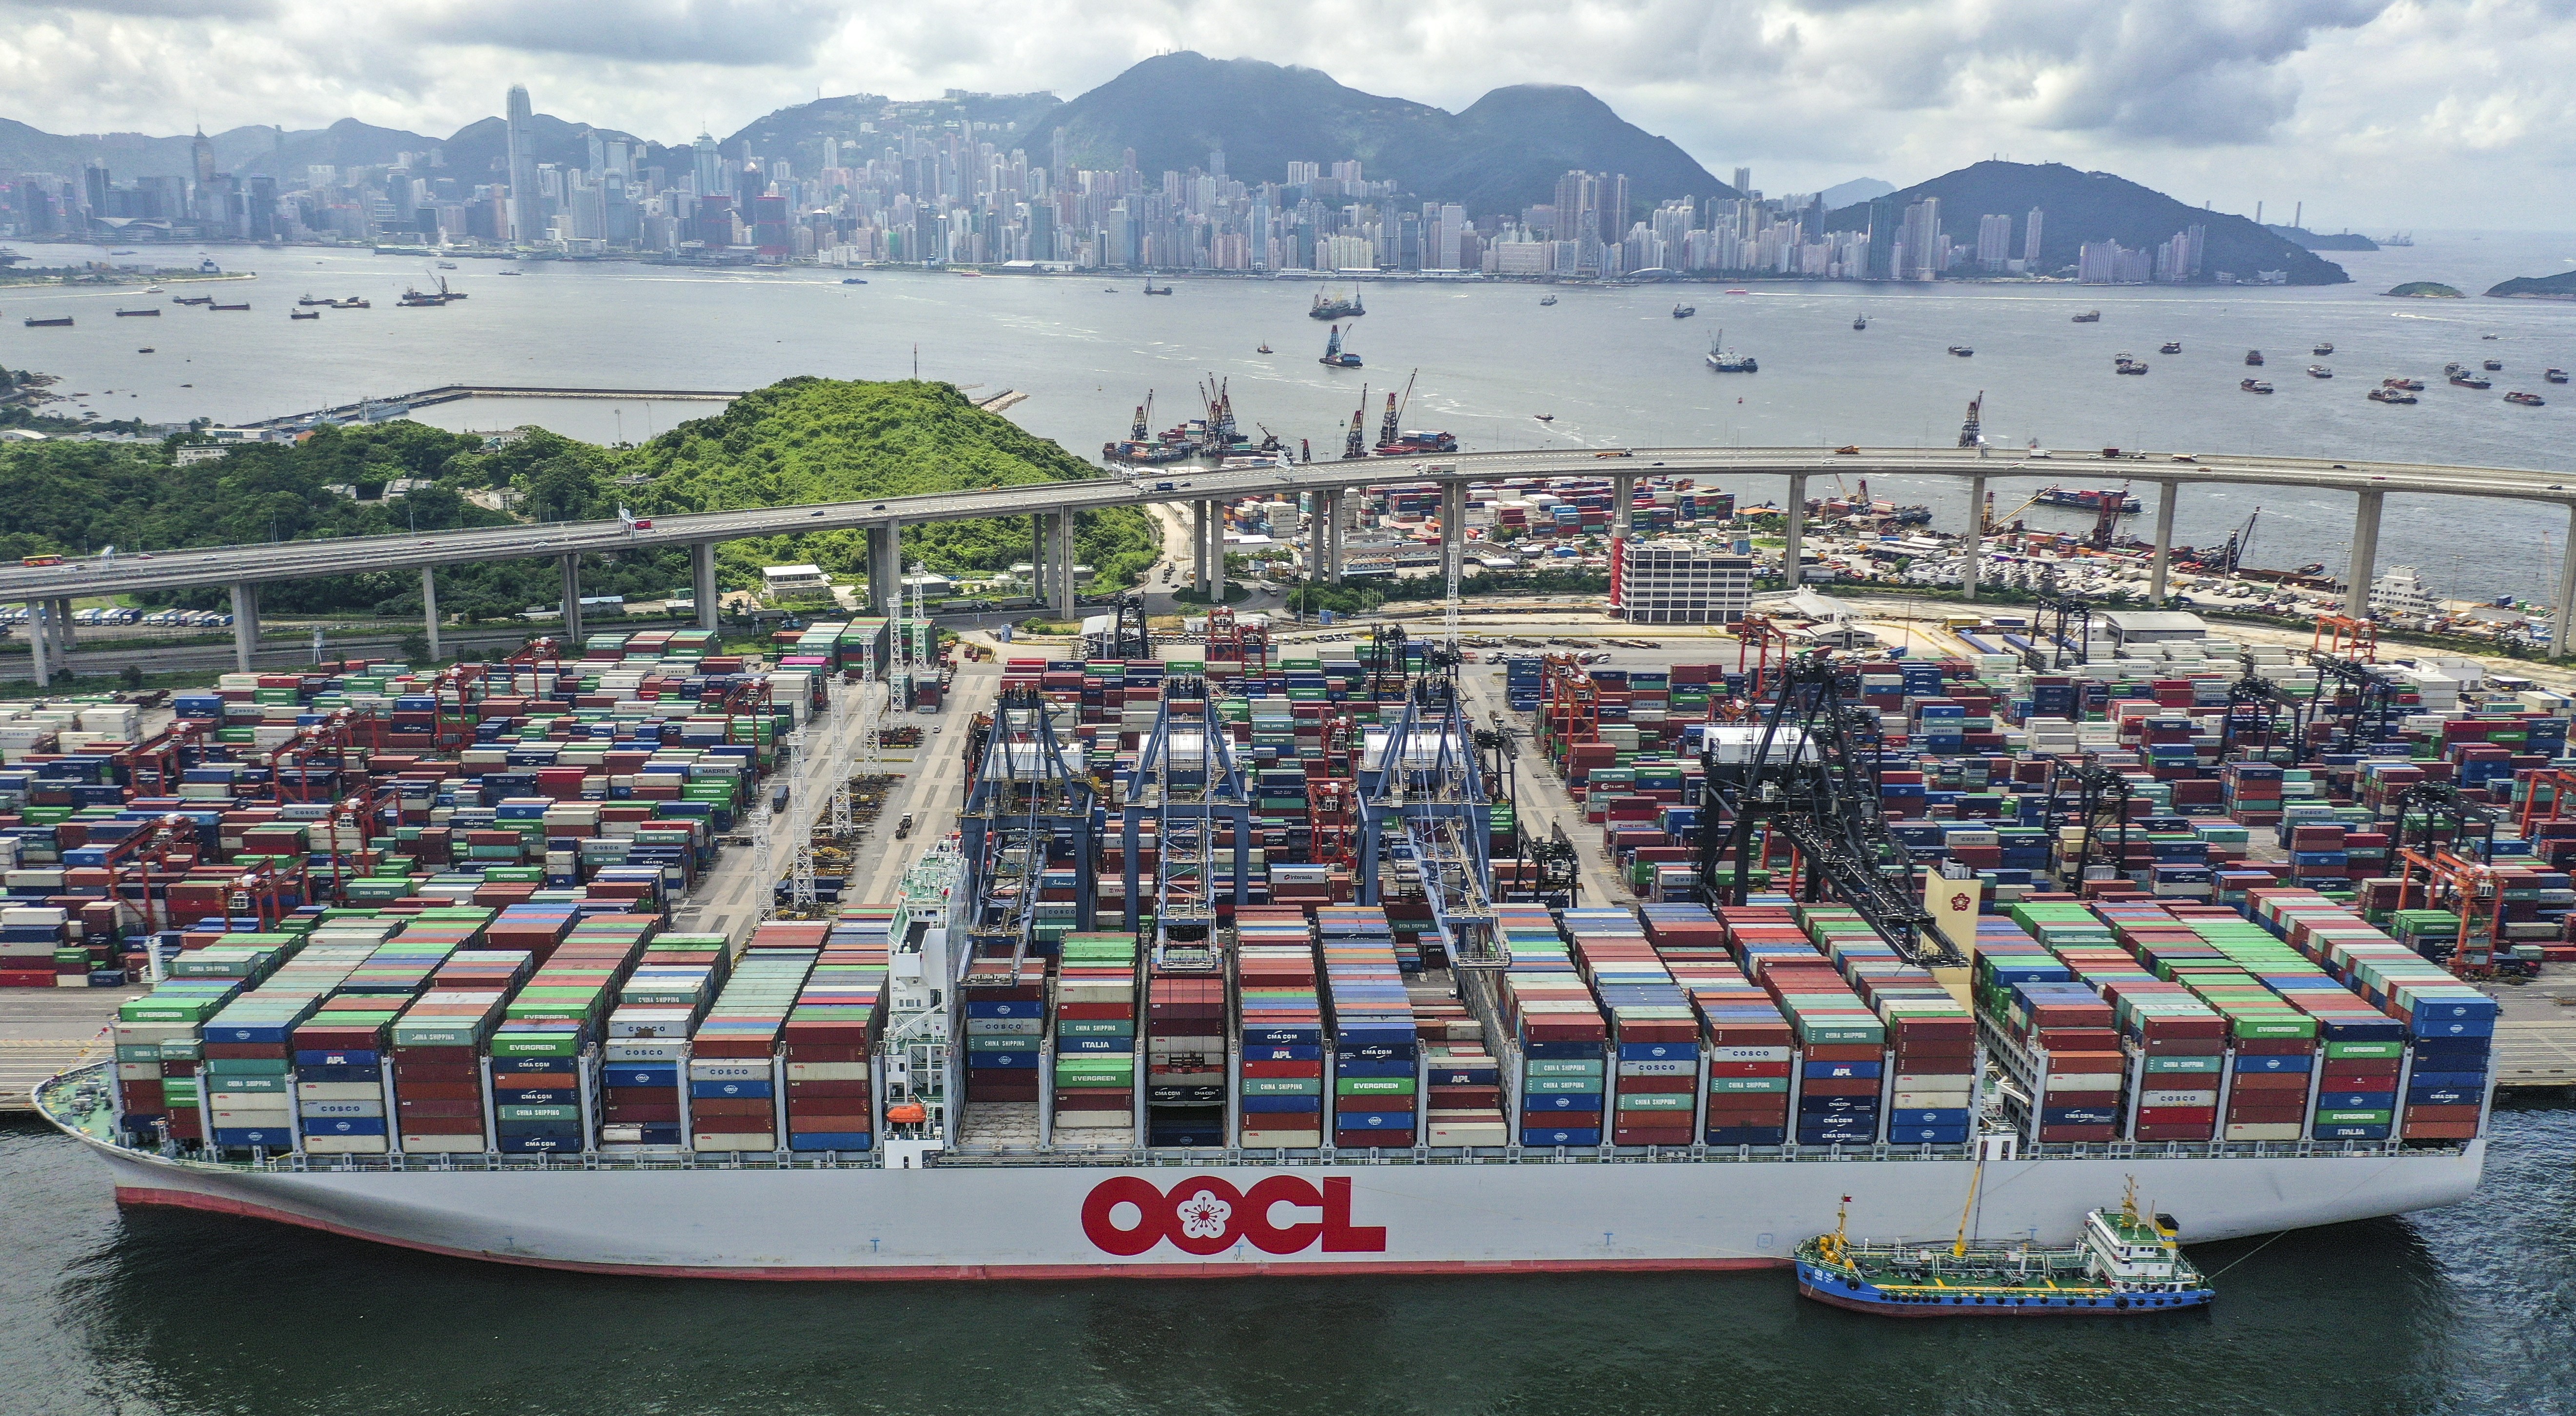 The OOCL Hong Kong, one of the world’s largest container ships, at the Hong Kong Container Terminal. Photo: Winson Wong